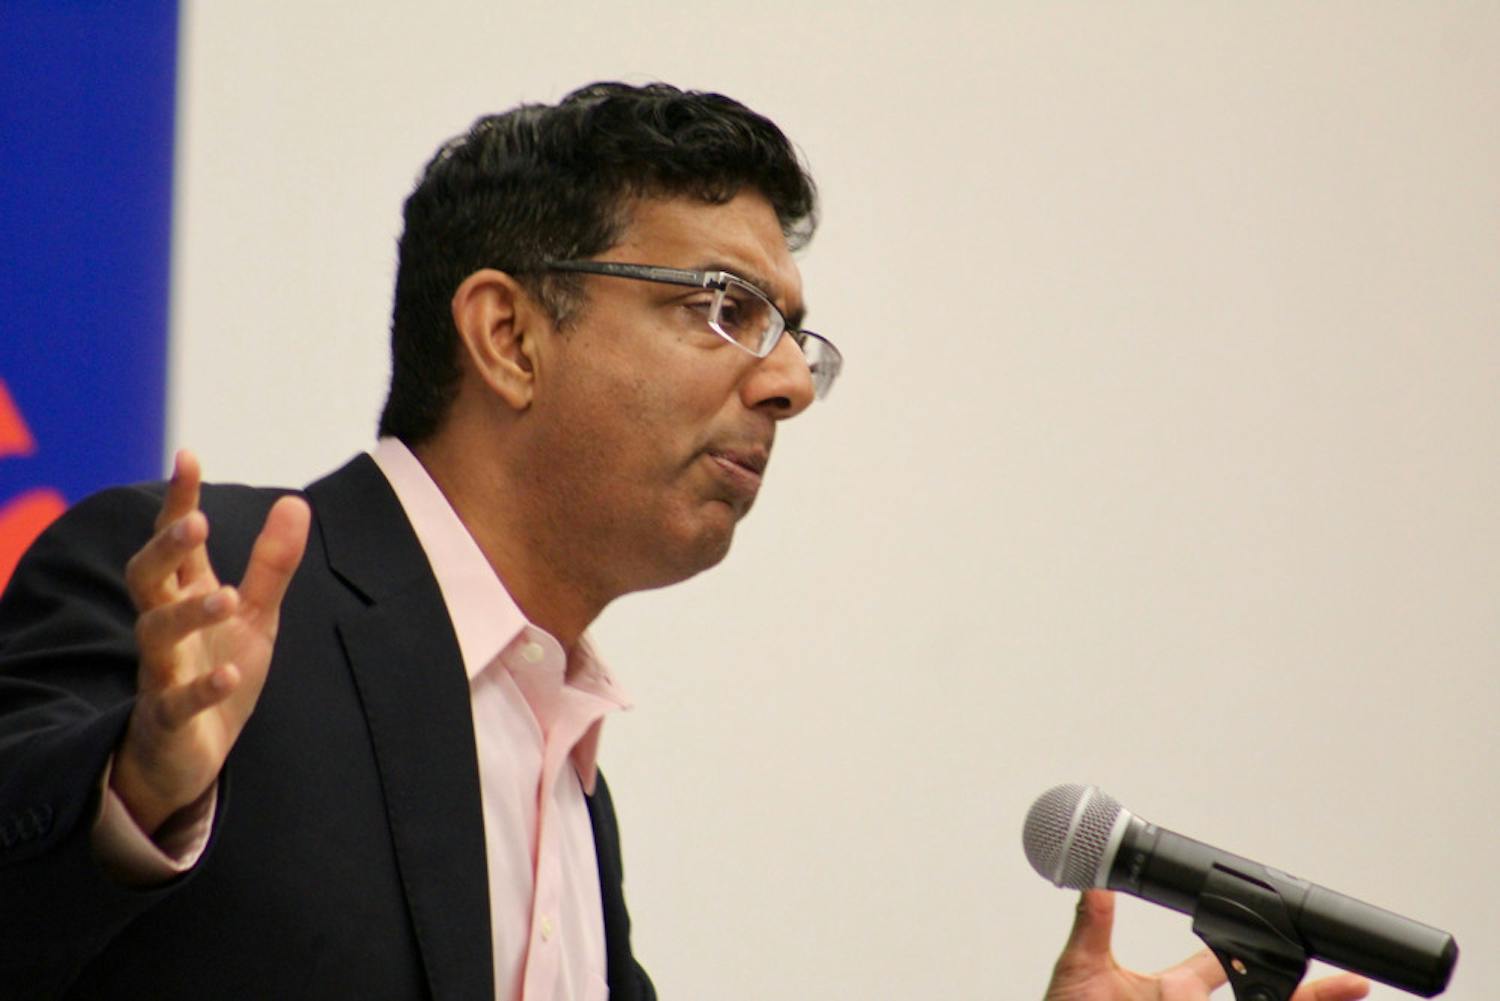 Dinesh D'Souza did not shy away from hard political topics and primarily talked about the differences between the Democratic and Republican Parties that have dominated American politics. 